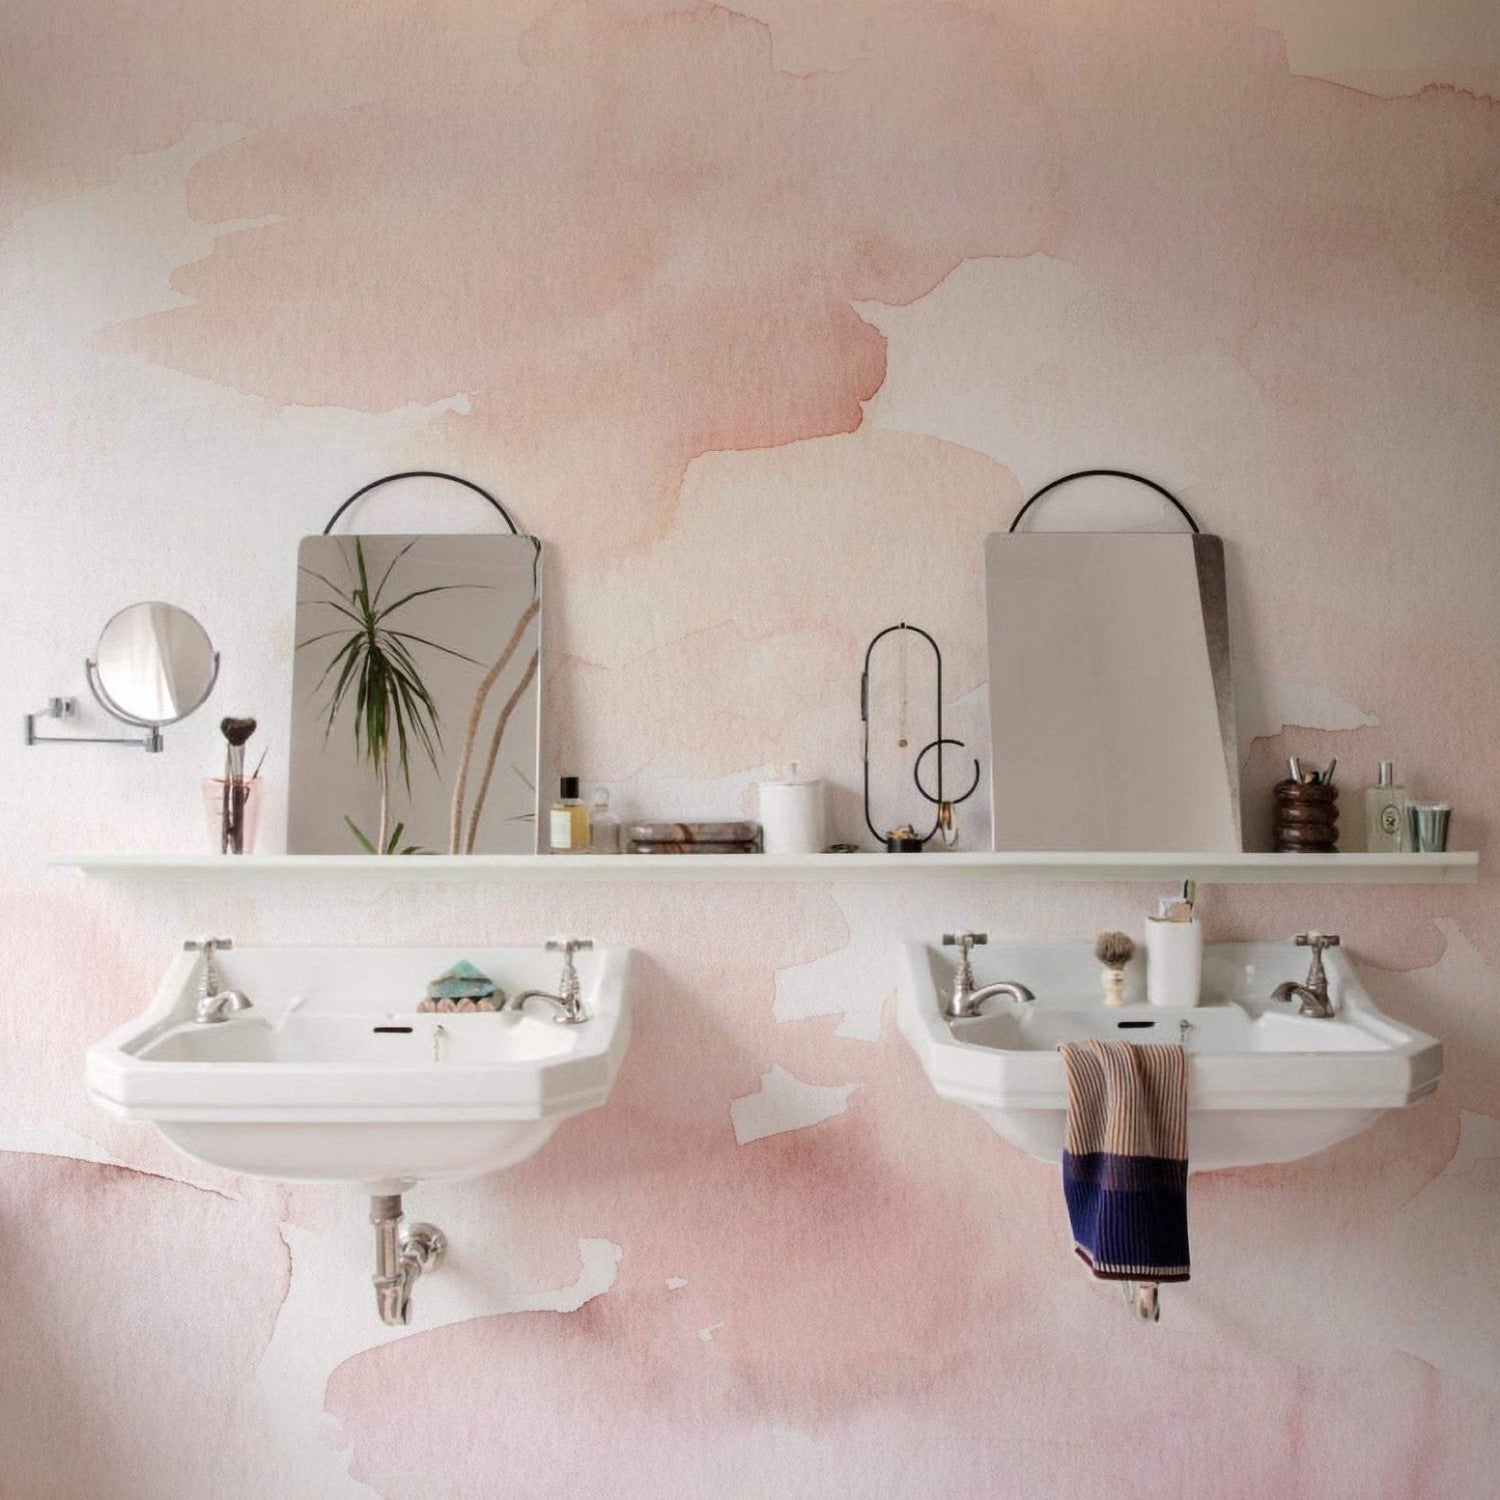 The Hand Painted Mural Wallpaper in a minimalist bathroom design, with its gentle pink watercolor strokes adding warmth and texture to the wall, harmonizing with simple white sinks and understated decor for a tranquil space.